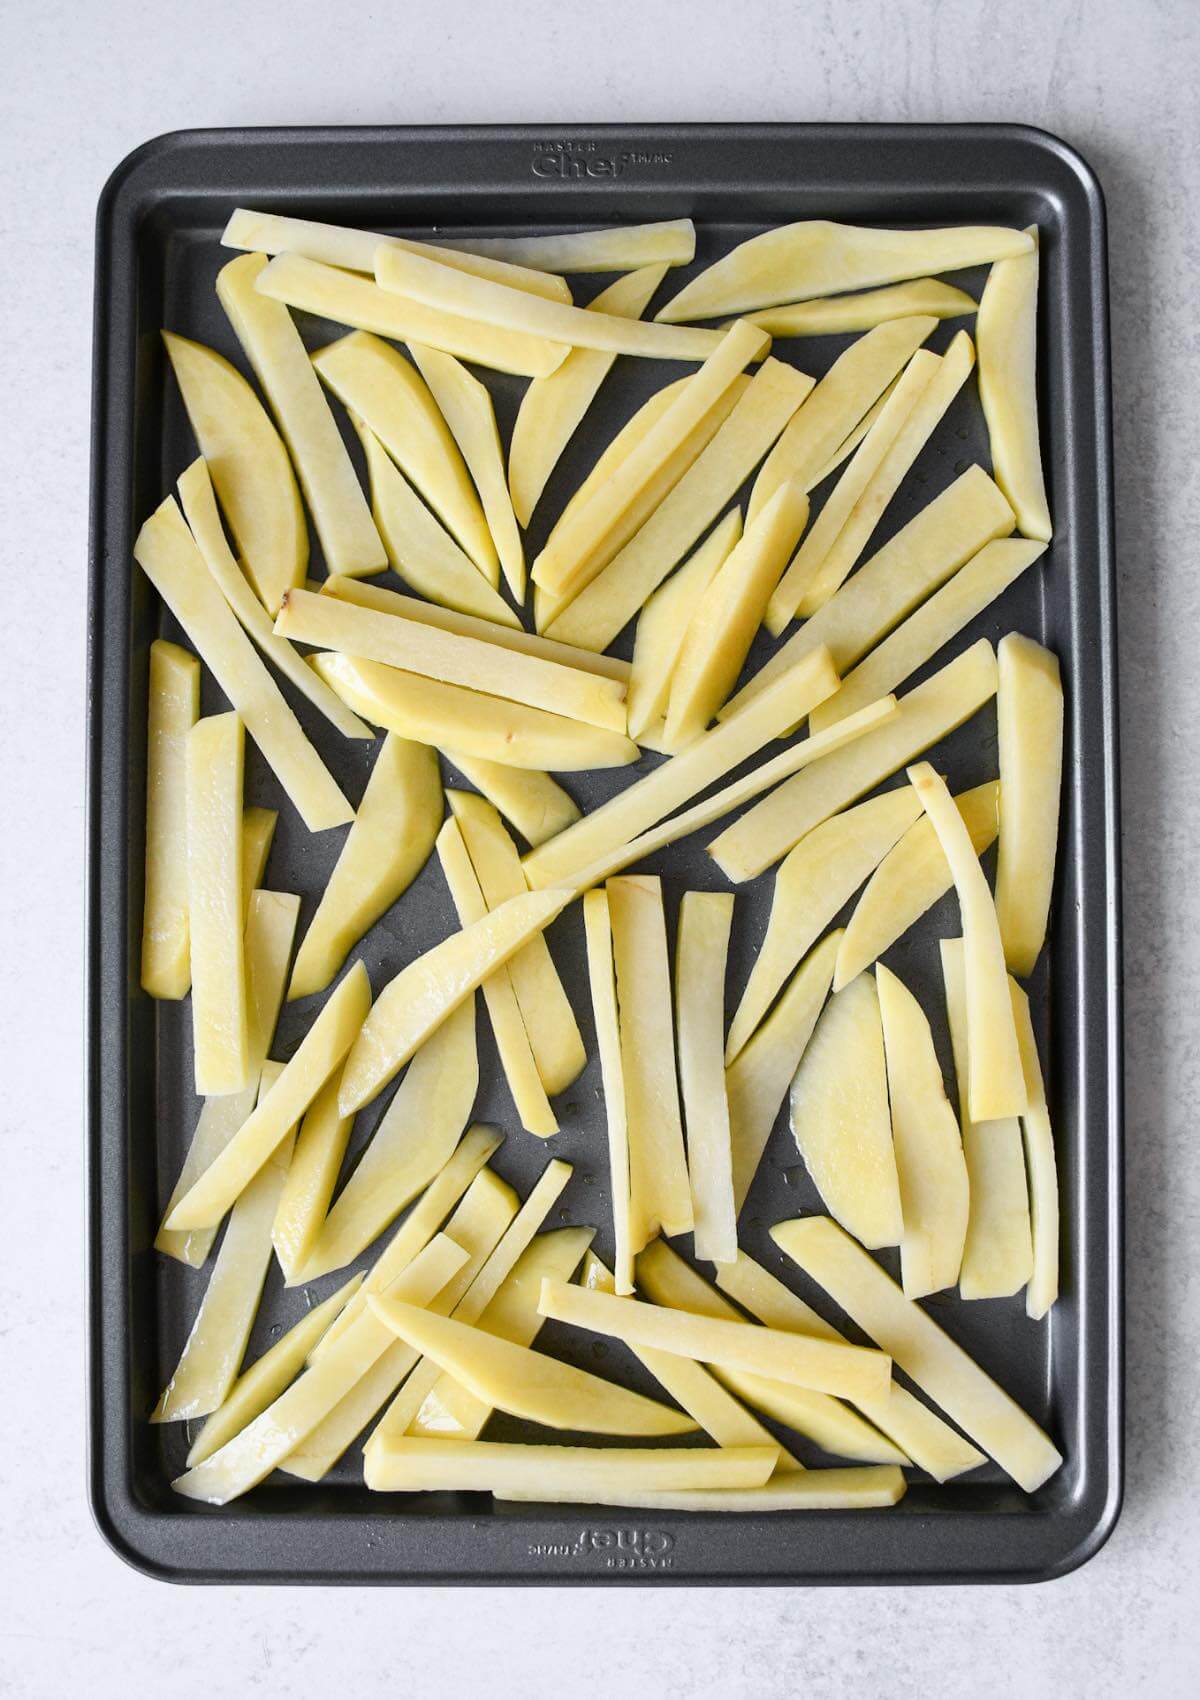 sliced uncooked fries on a baking sheet.